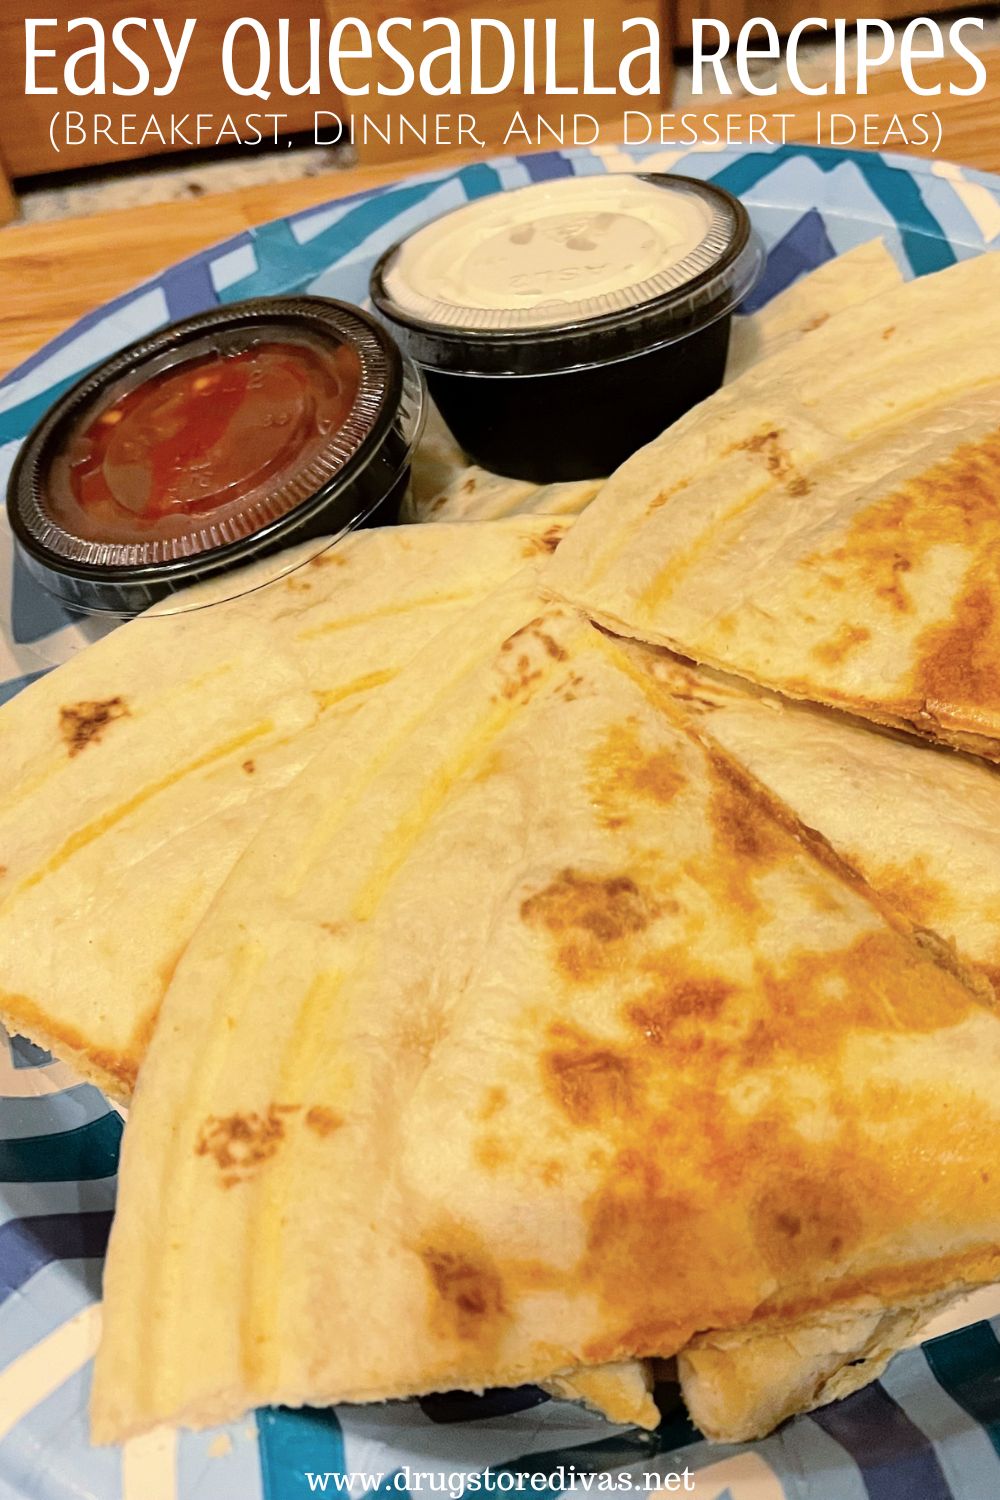 Quesadillas on a plate with sour cream and salsa and the words 